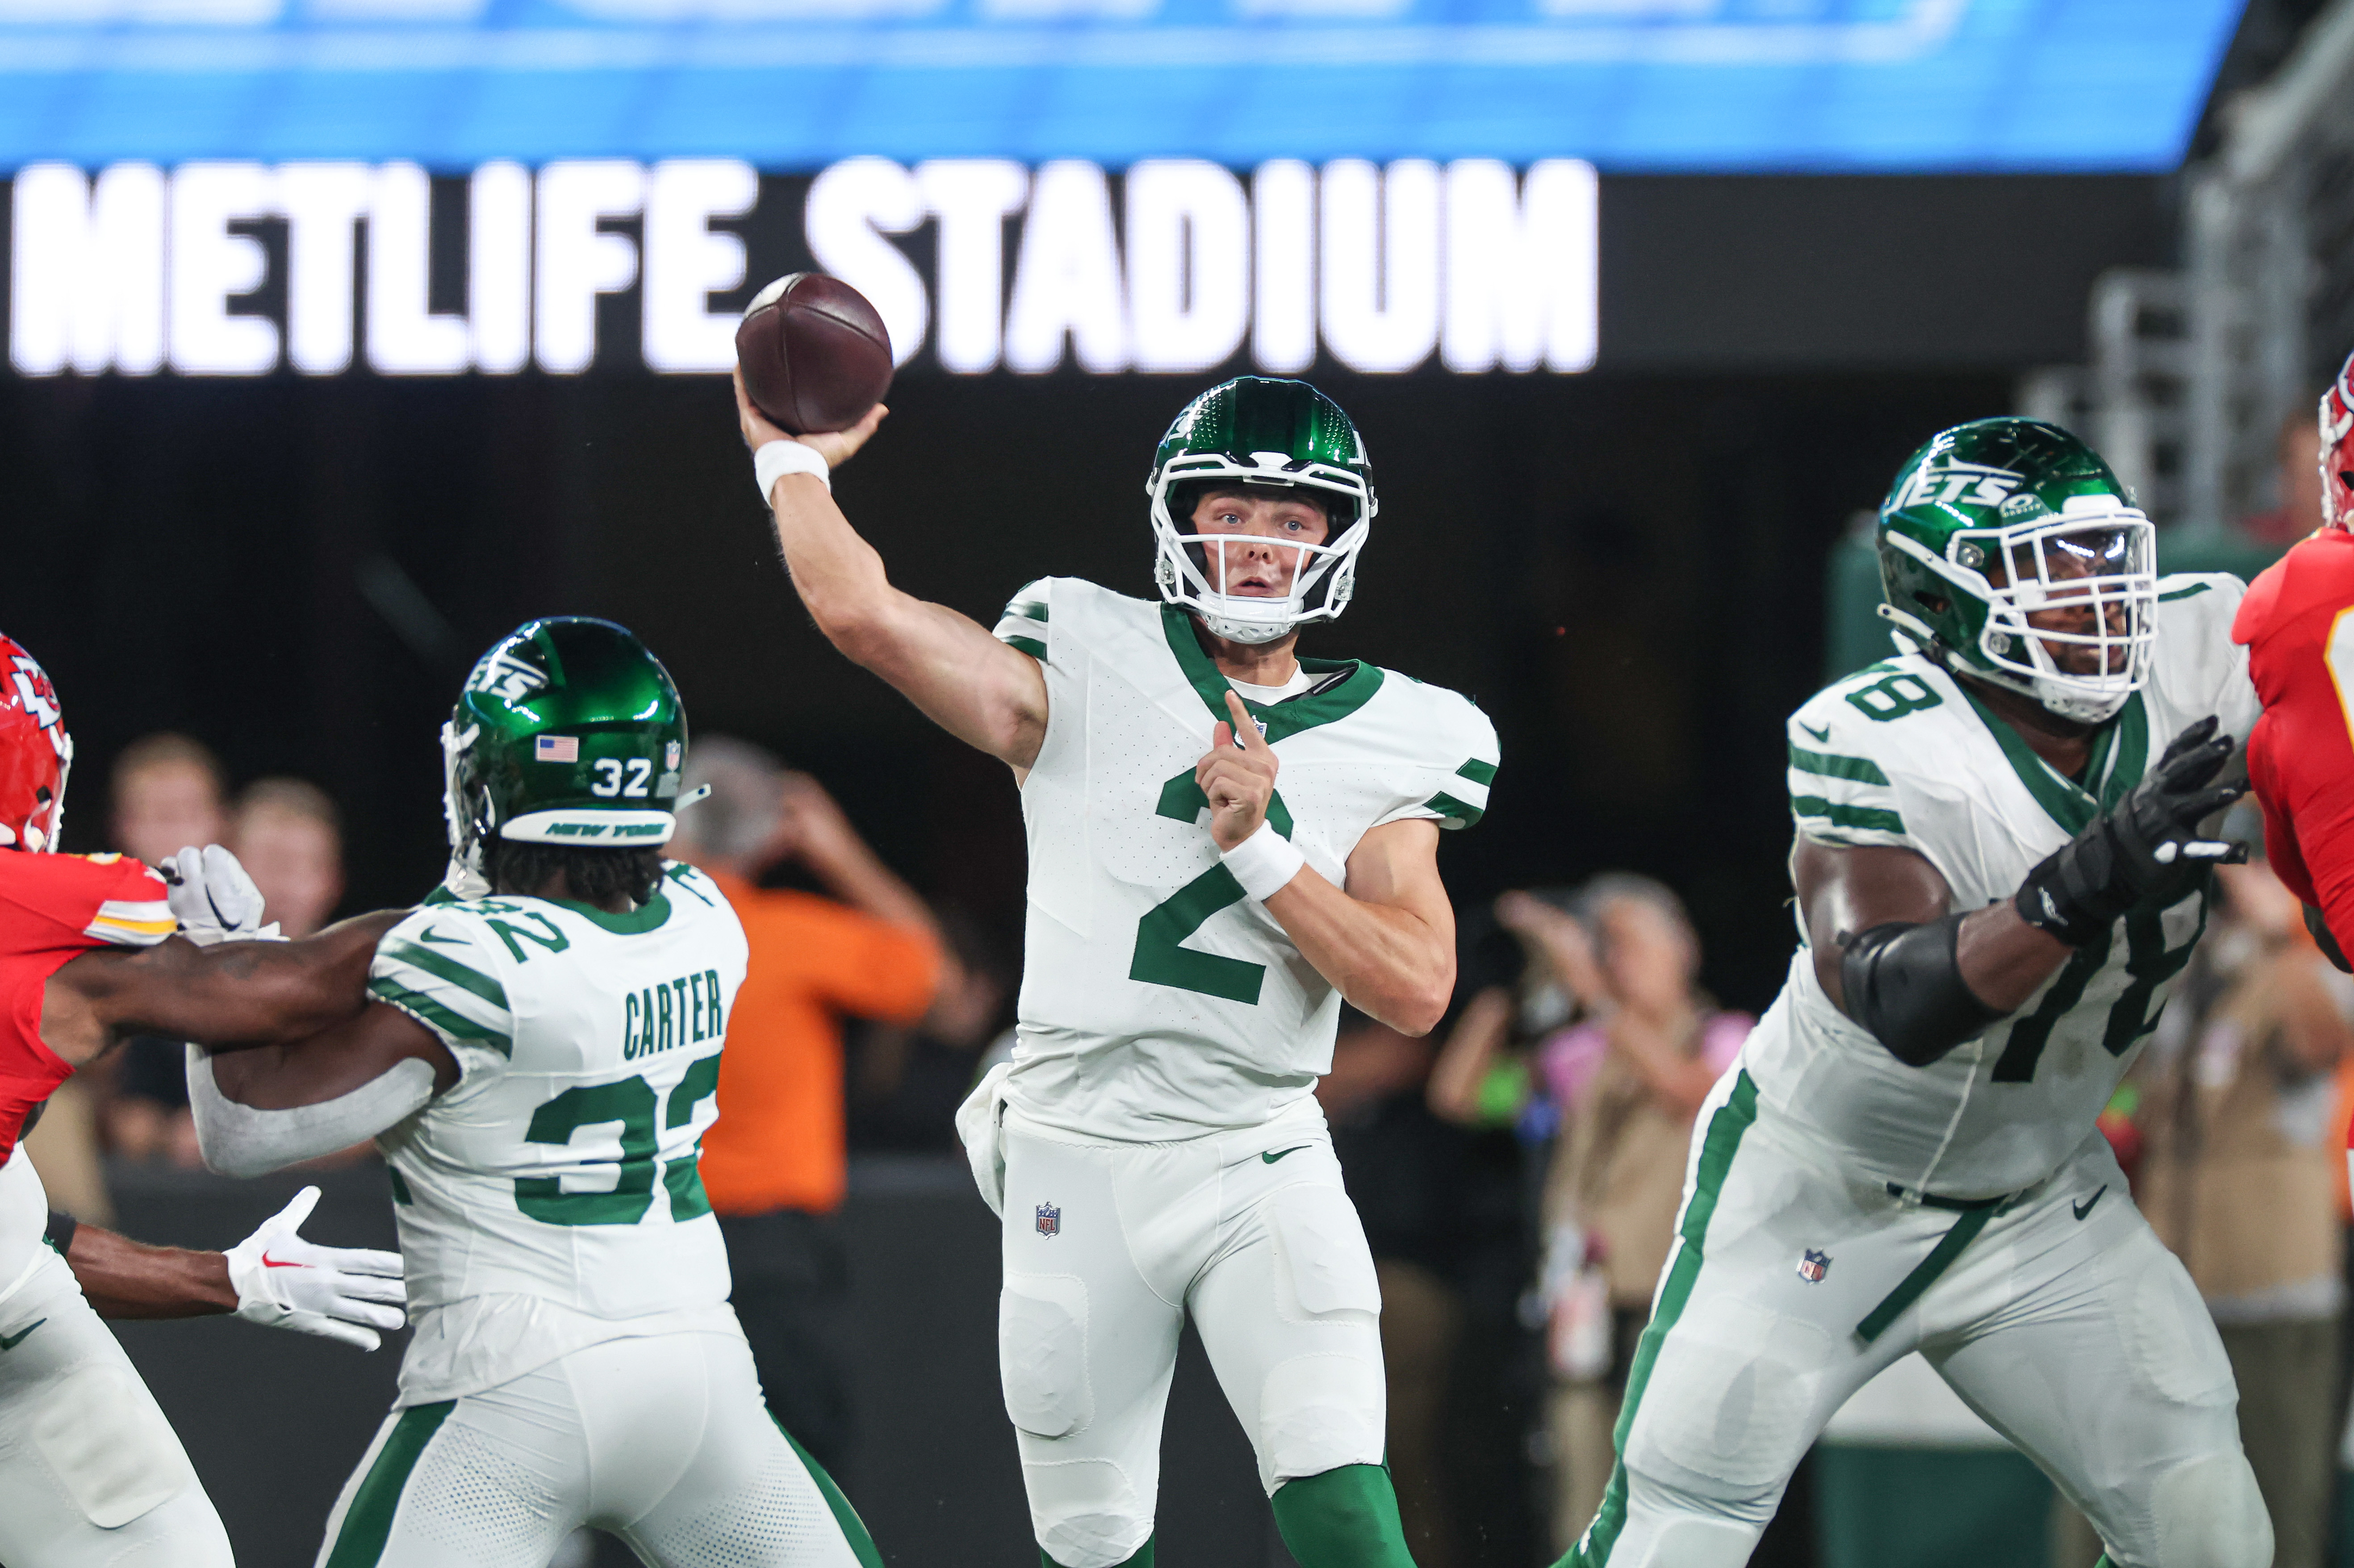 New York Jets quarterback Zach Wilson (2) throws the ball during the first half against the Kansas City Chiefs at MetLife Stadium